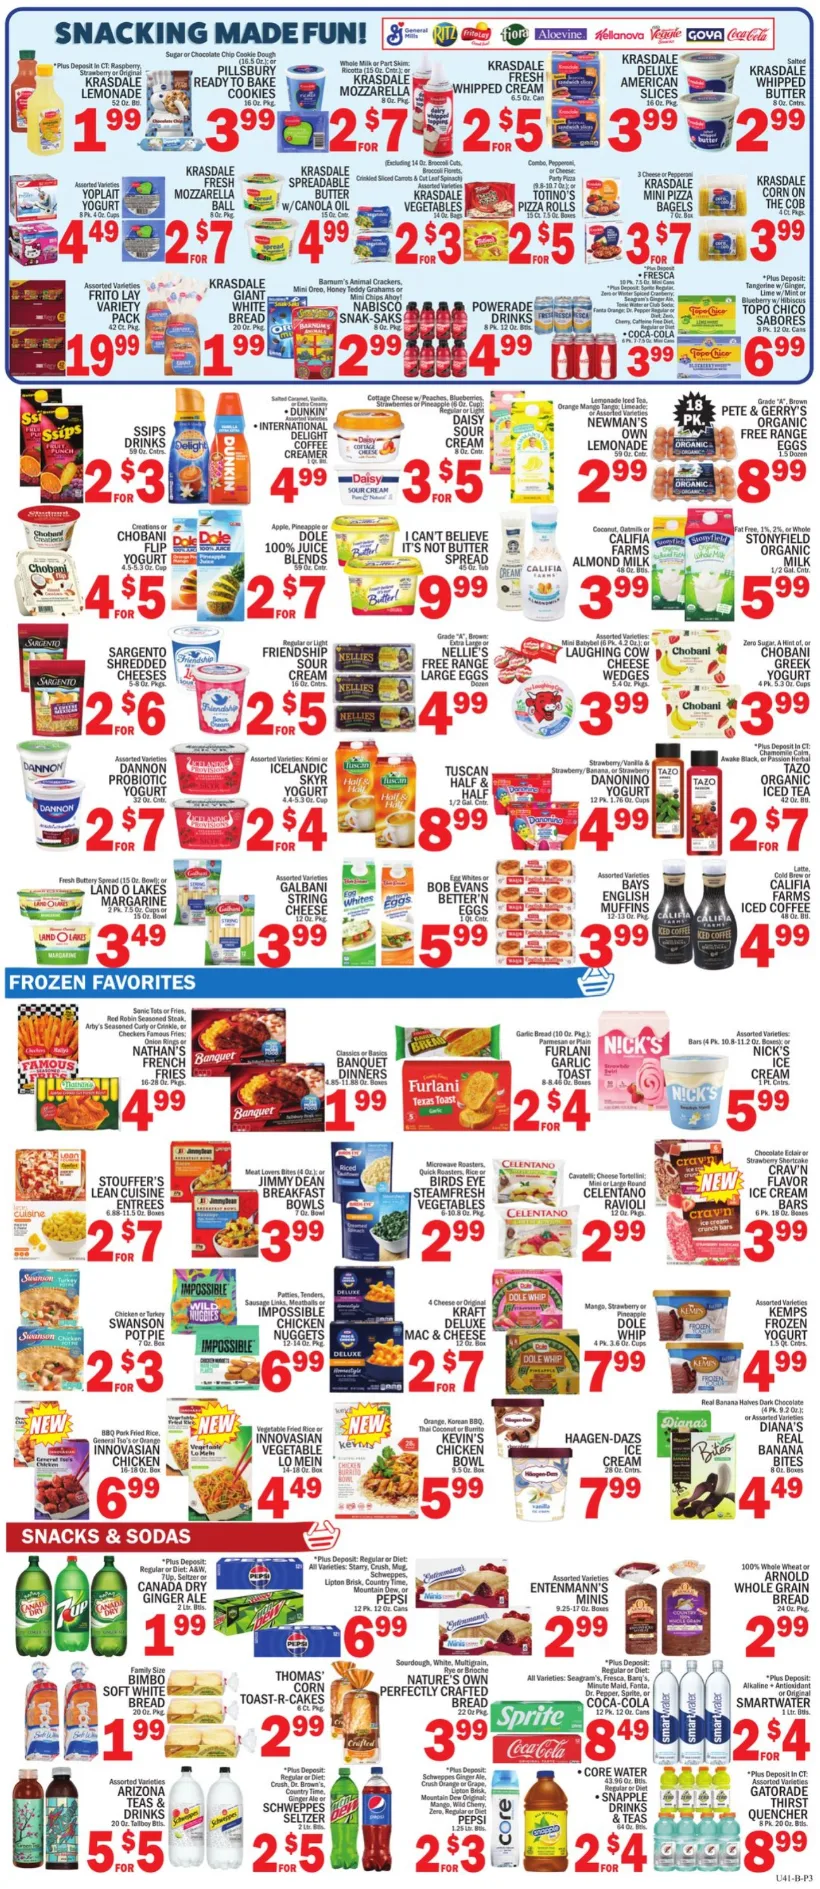 Ctown Weekly Ad July 2024 Weekly Sales, Deals, Discounts and Digital Coupons.